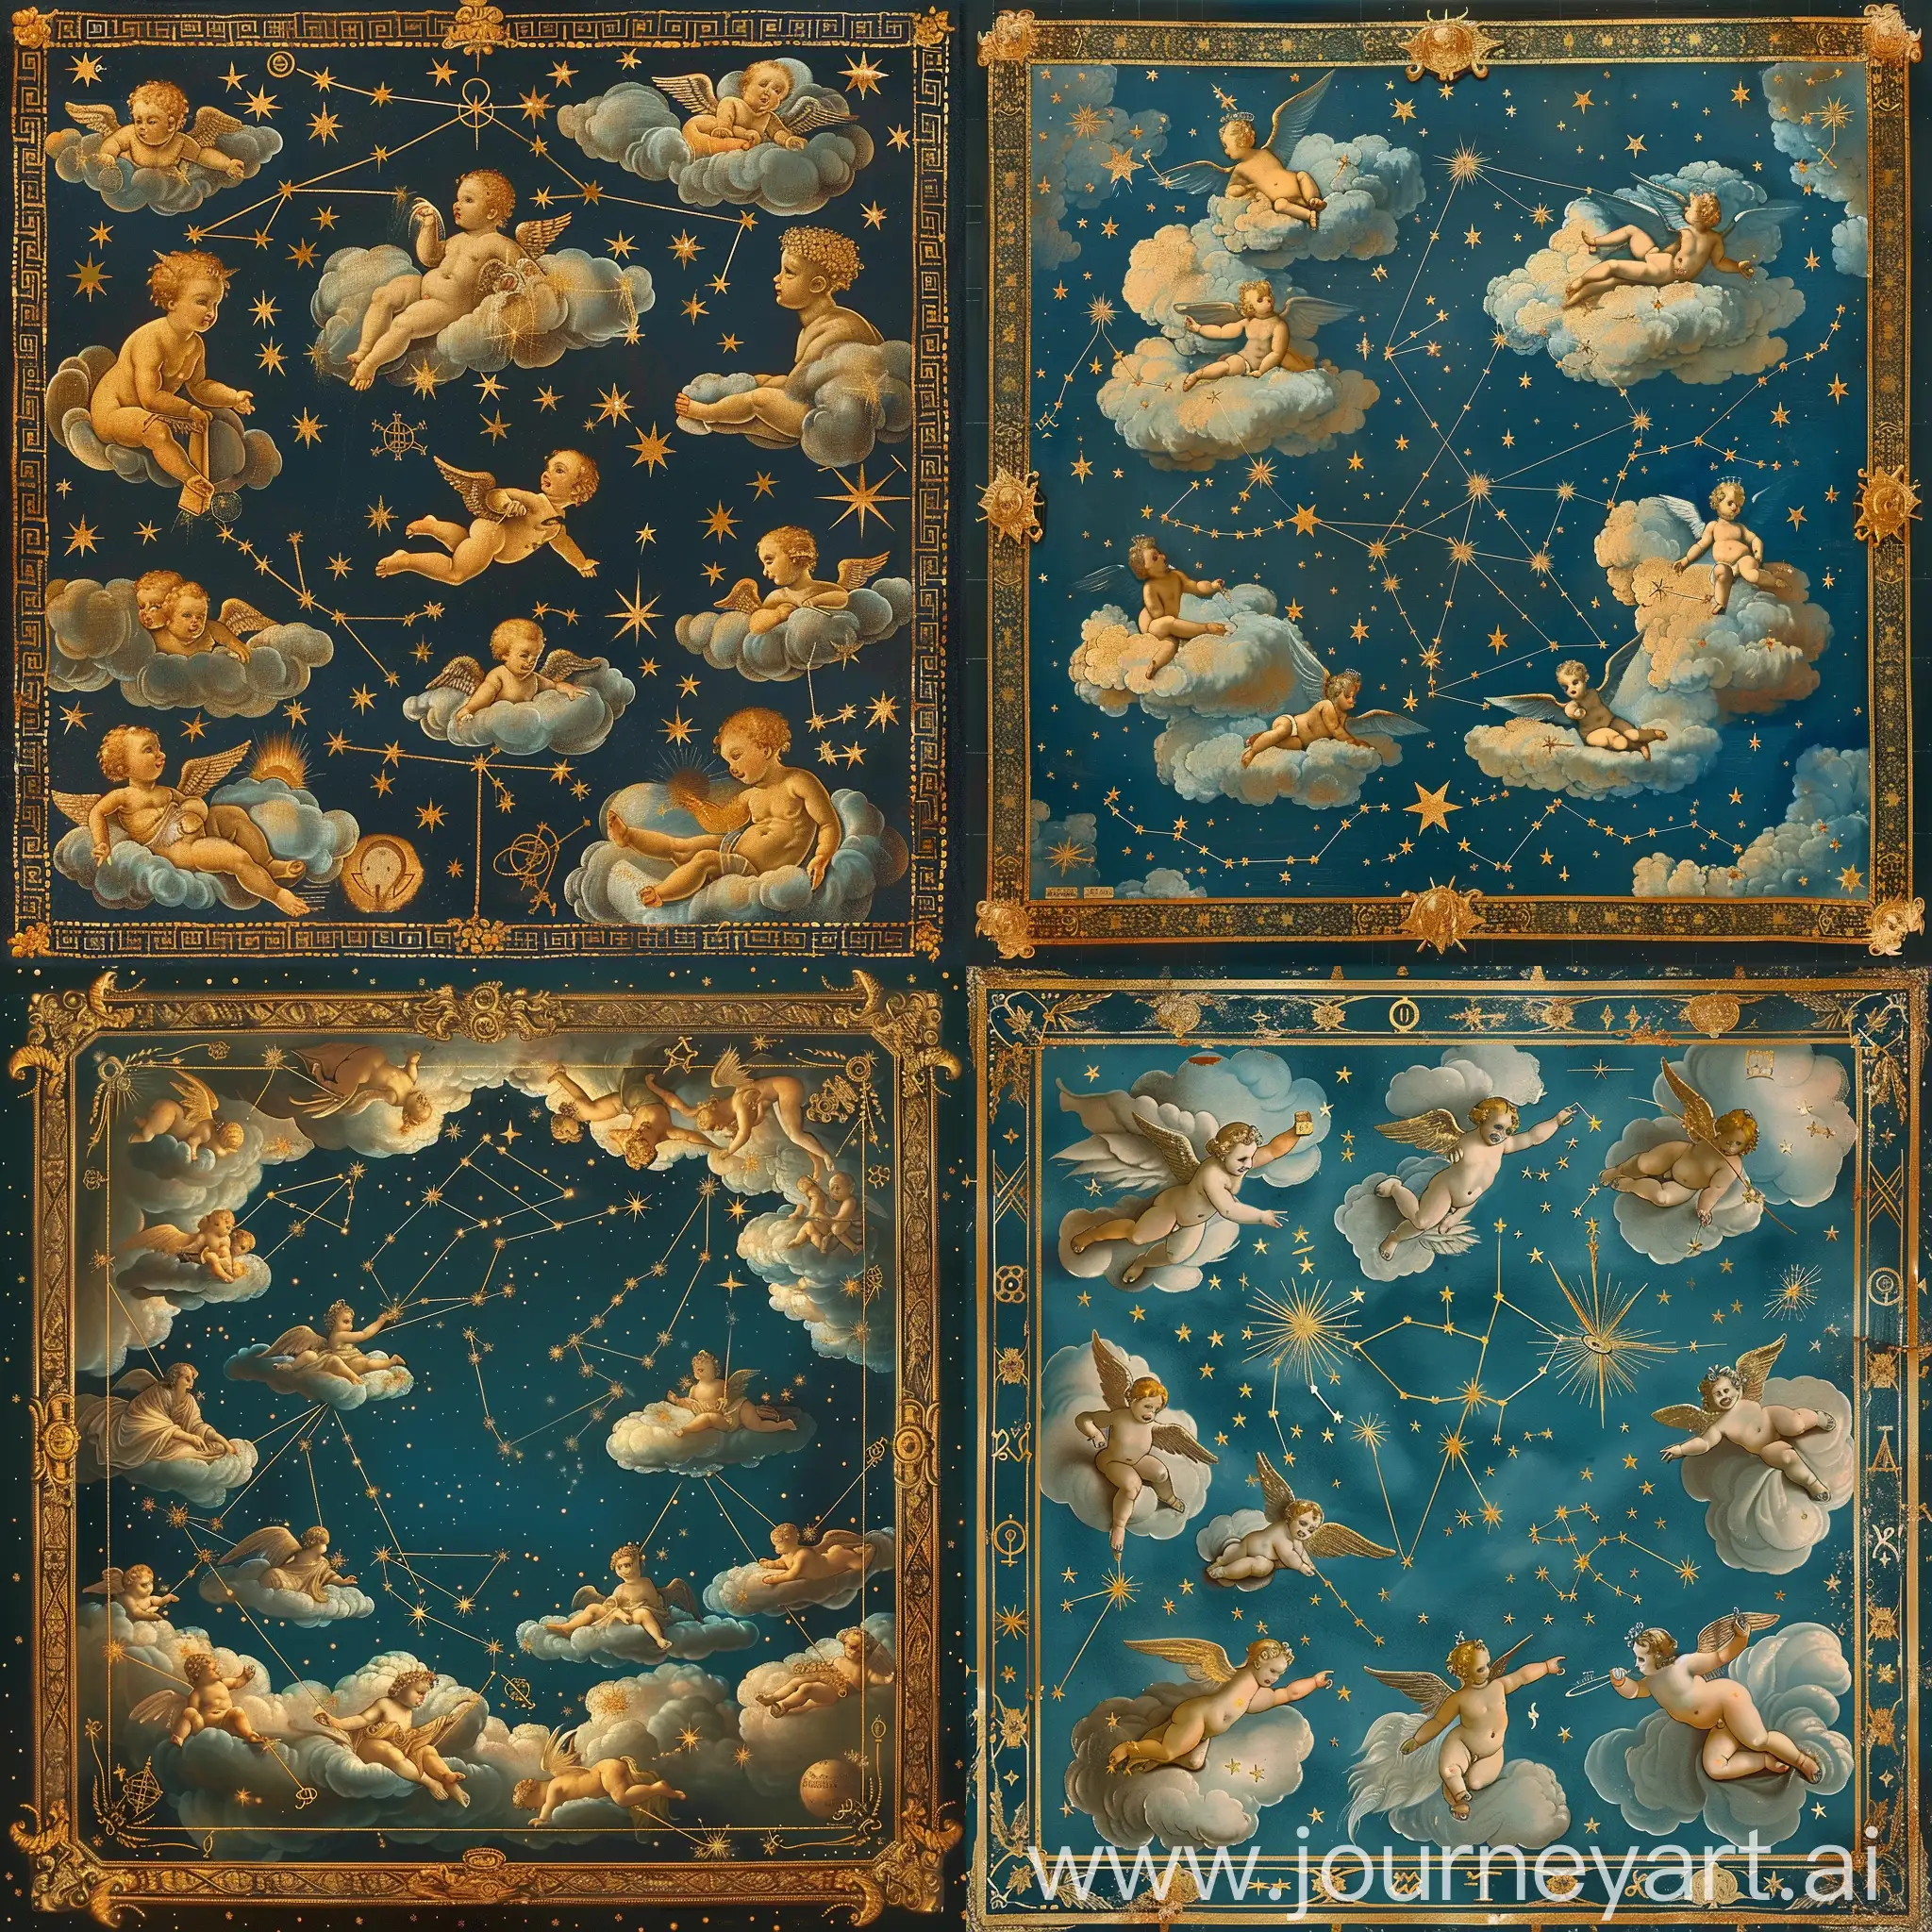 sky in the style of a baroque painting, stars are painted with gold paint, gods, clouds, little angels, zodiacal star constellations, framed with golden lines and zodiac symbols